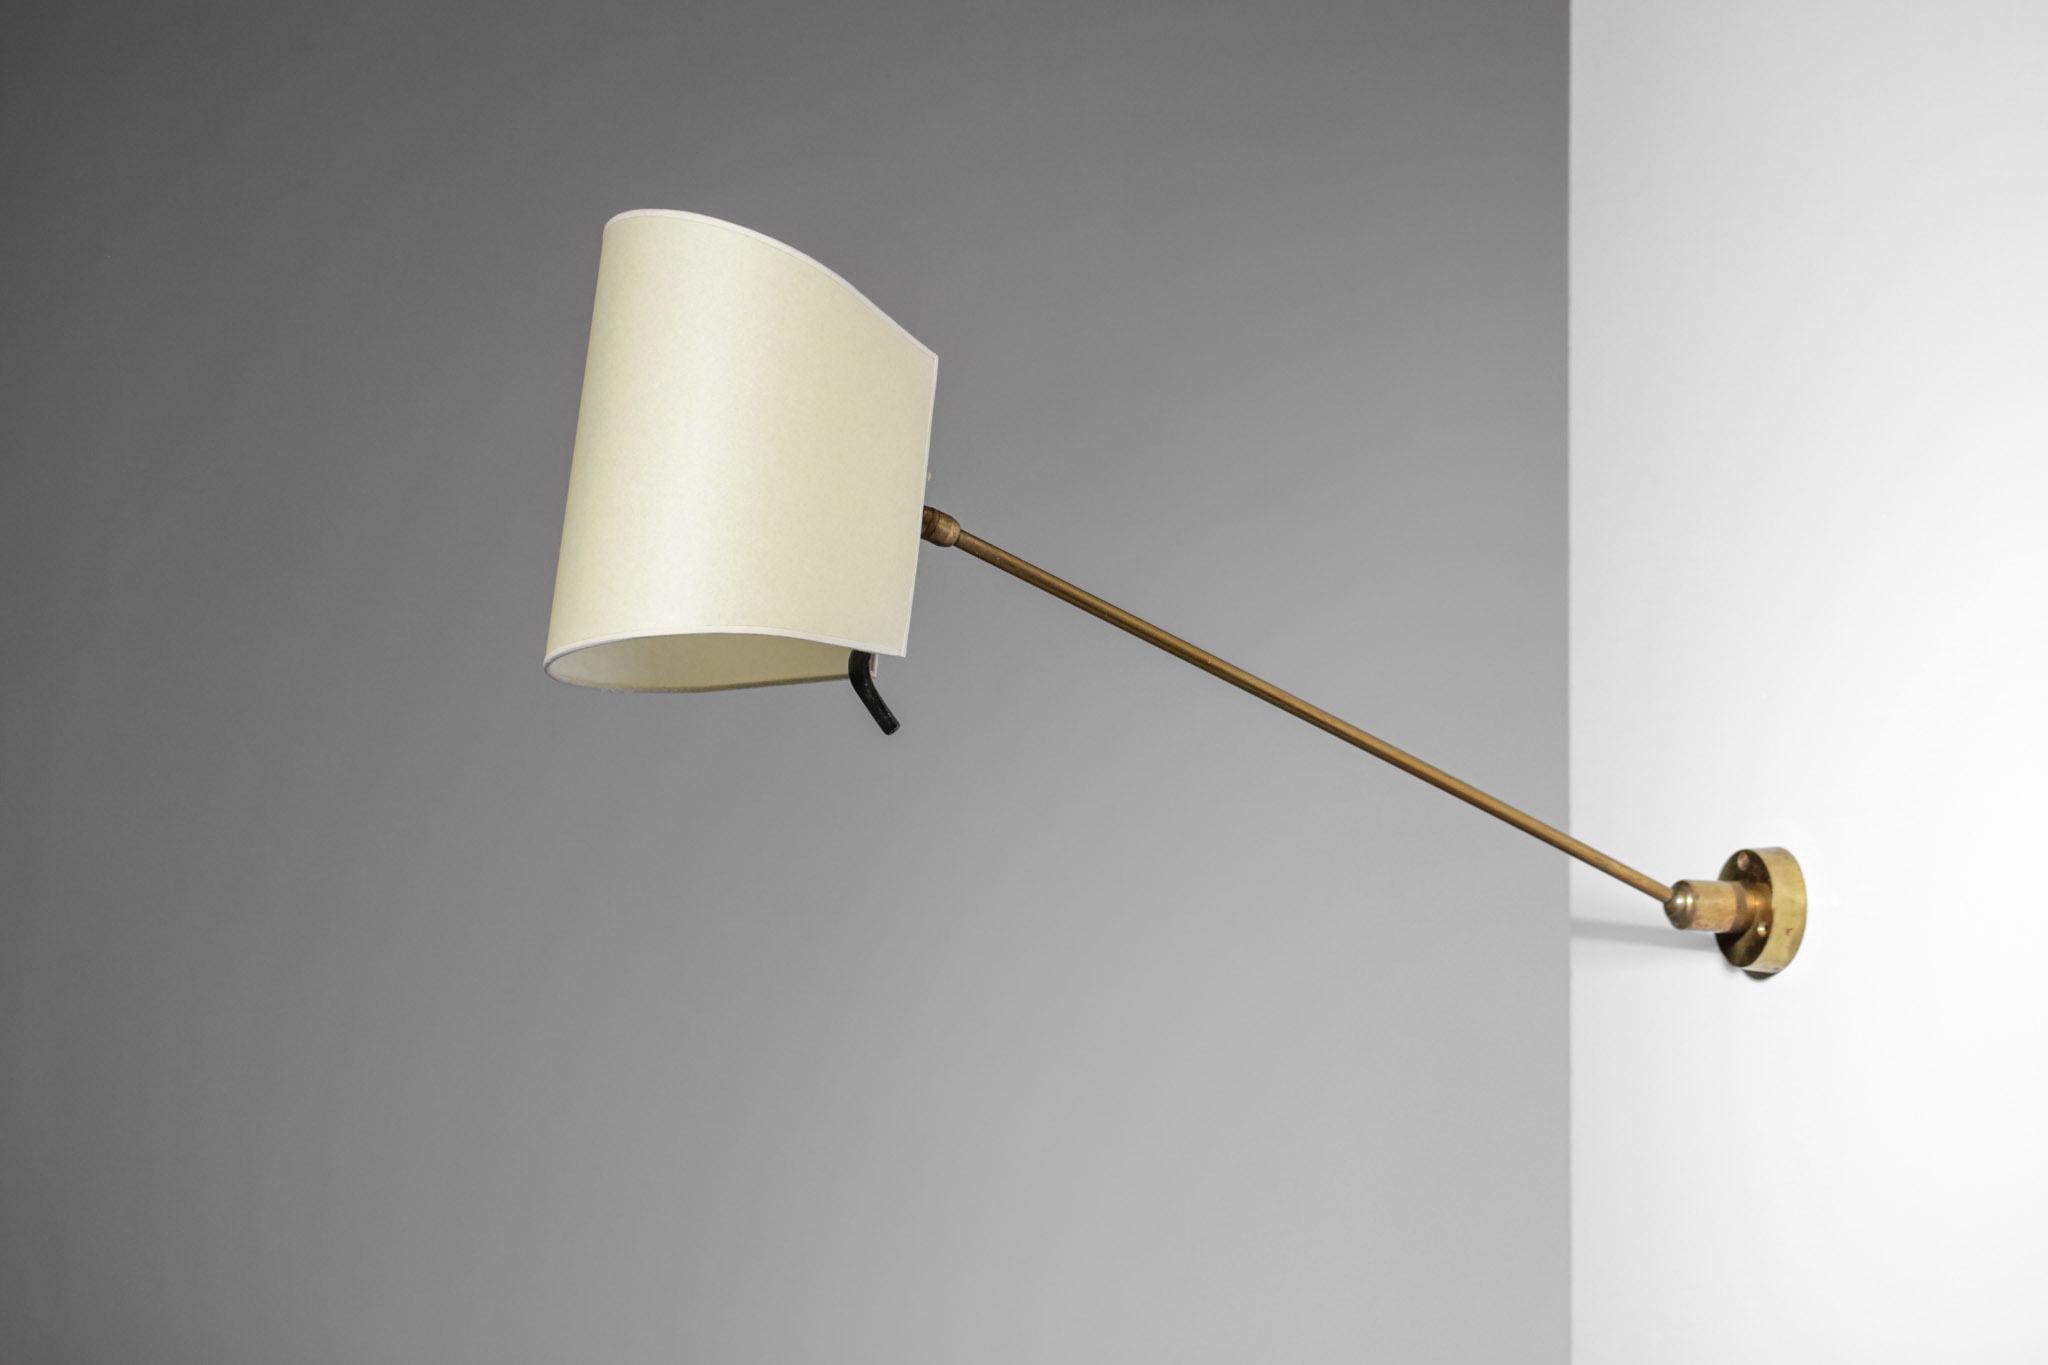 French wall lamp from the 50's, arm structure in black lacquered metal, base and ball joint in solid brass. Possibility to orientate the shade and the arm in different positions, double bulb lighting. Very sober but elegant design, lampshade